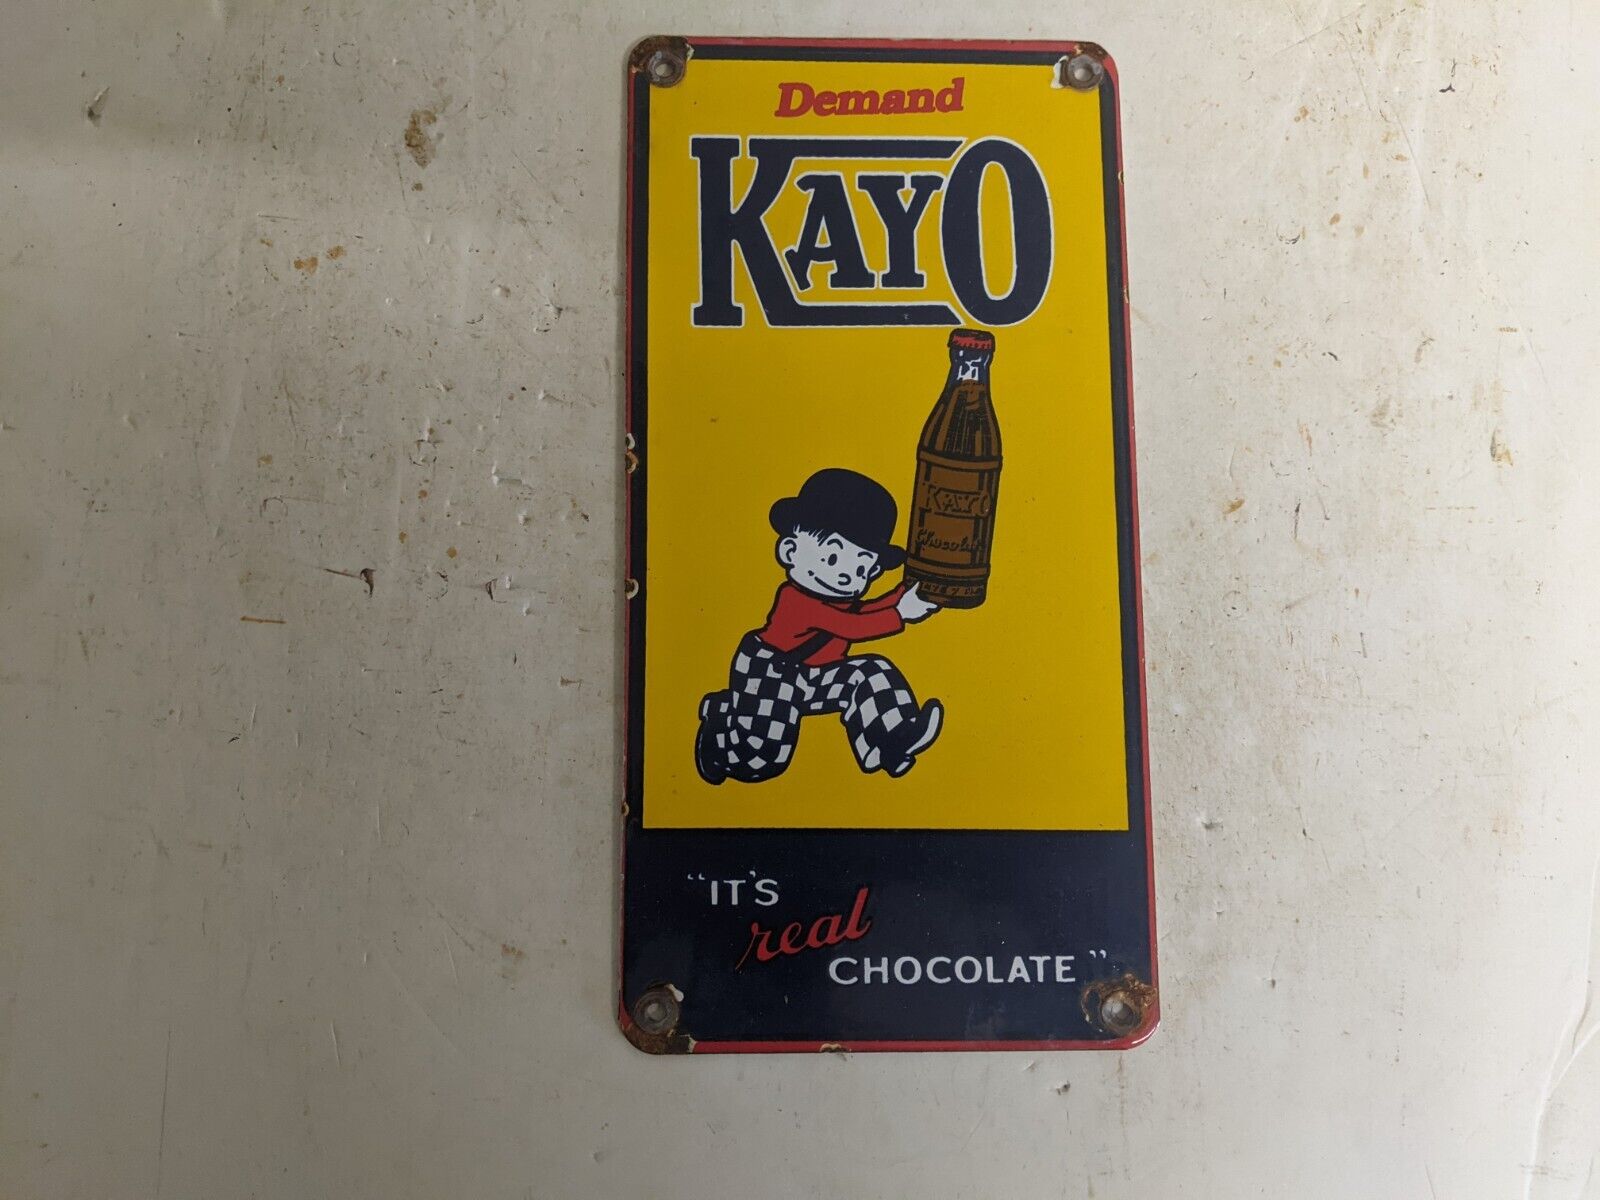 OLD VINTAGE DEMAND KAYO CHOCOLATE CANDY PORCELAIN HEAVY METAL SIGN FOOD